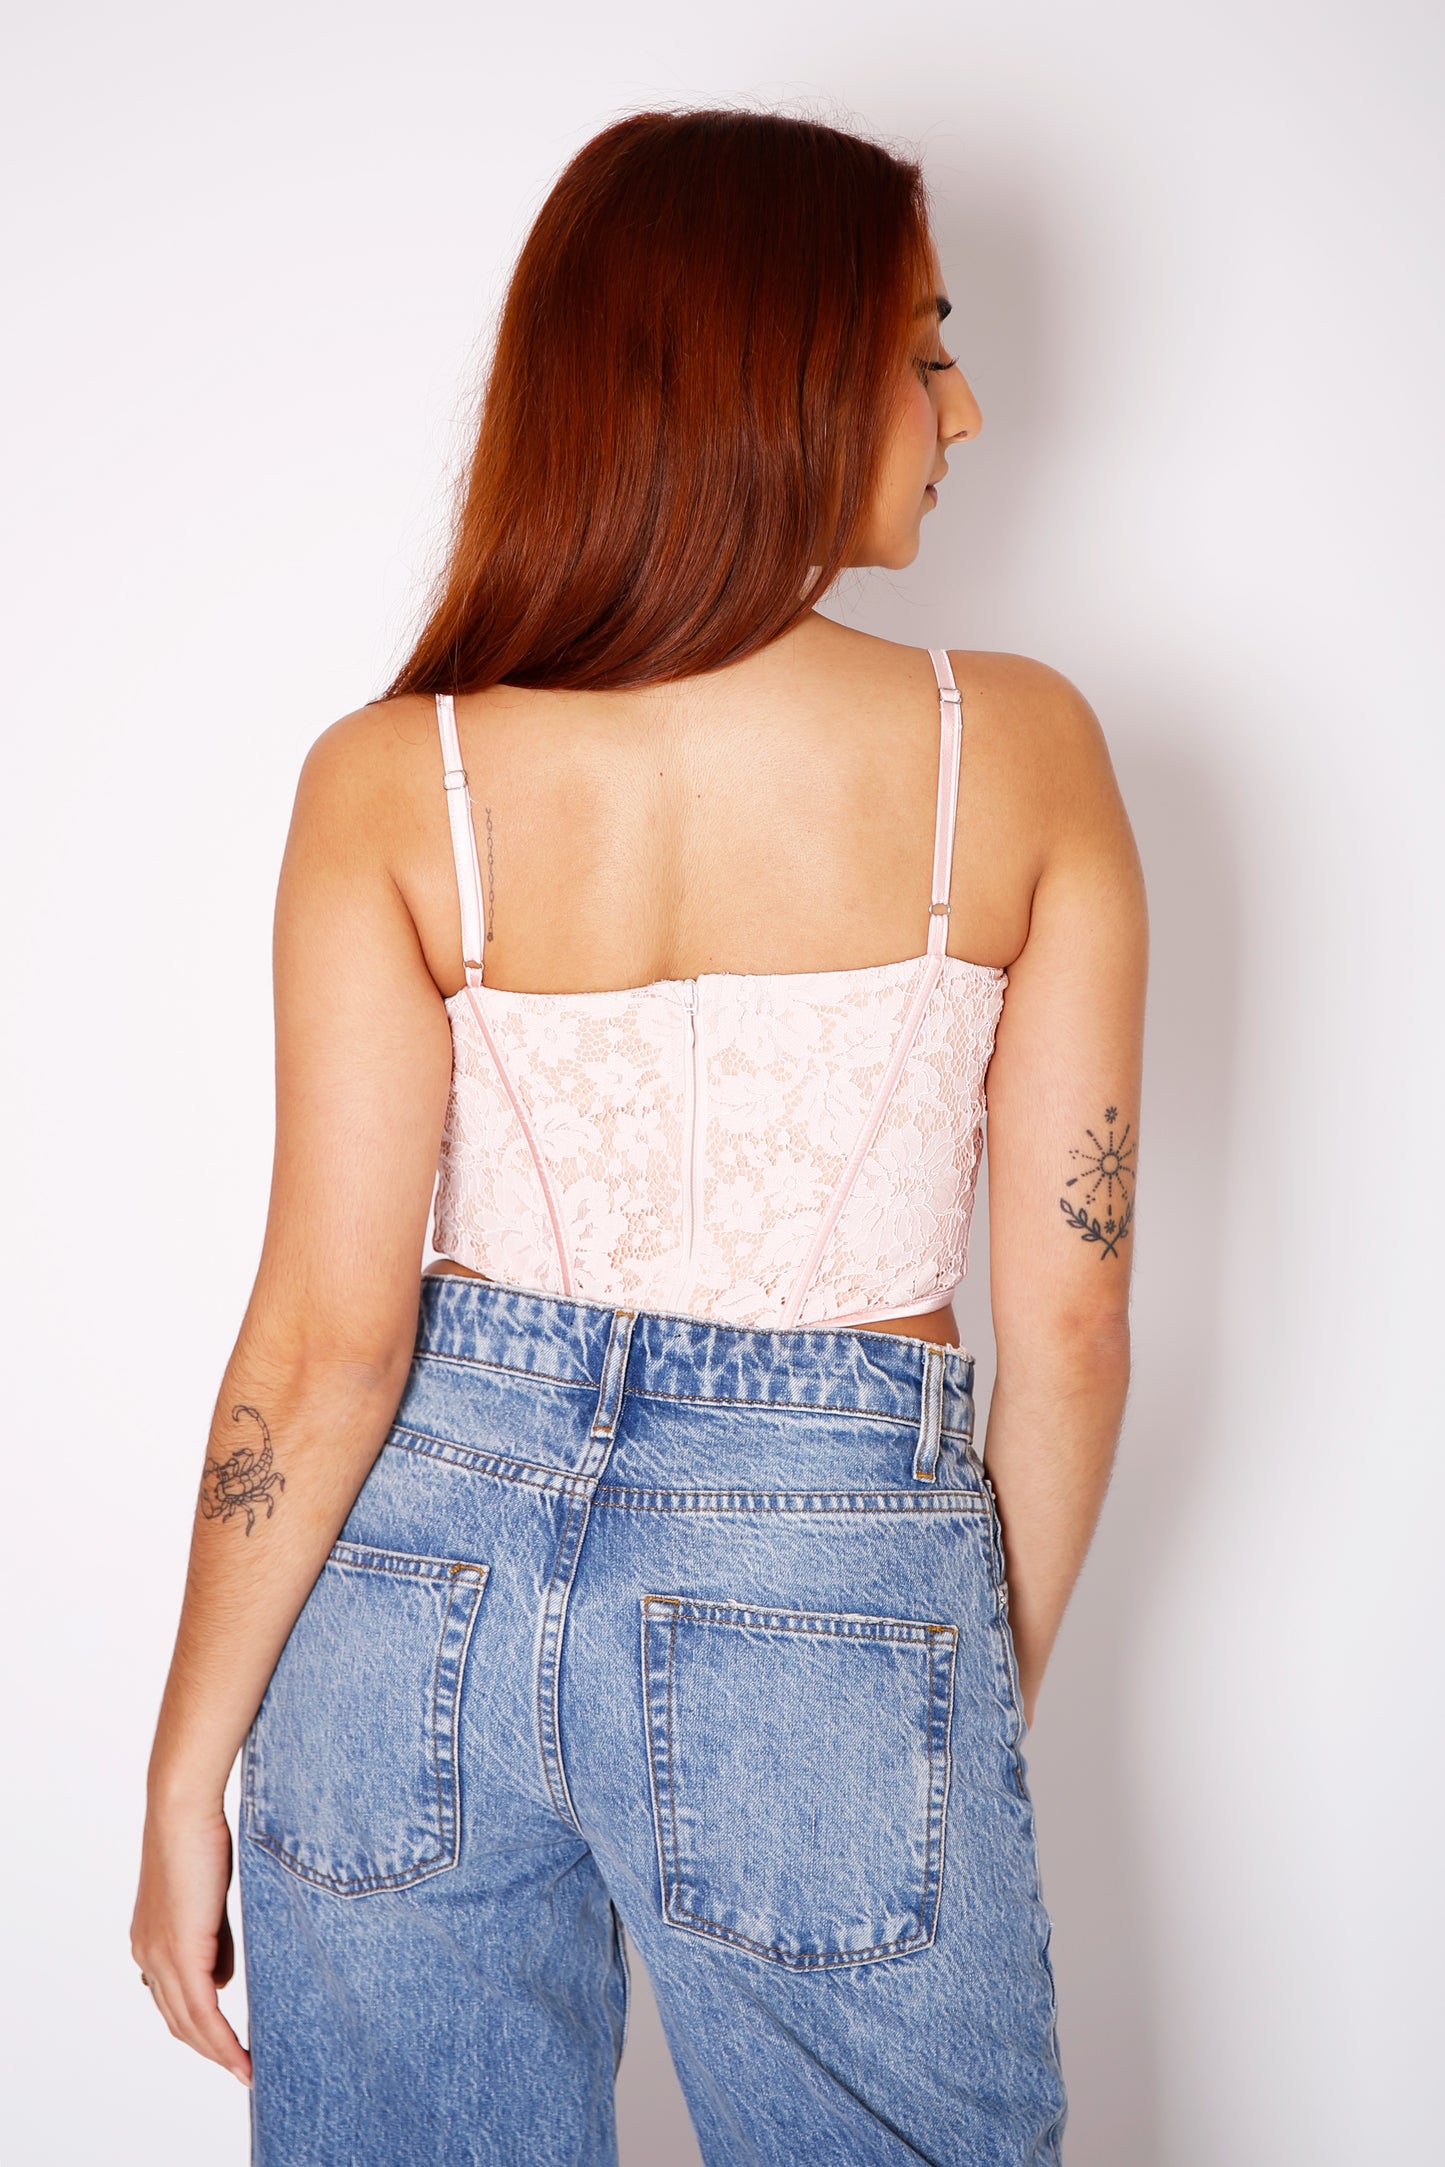 Pink Lace Corset Top